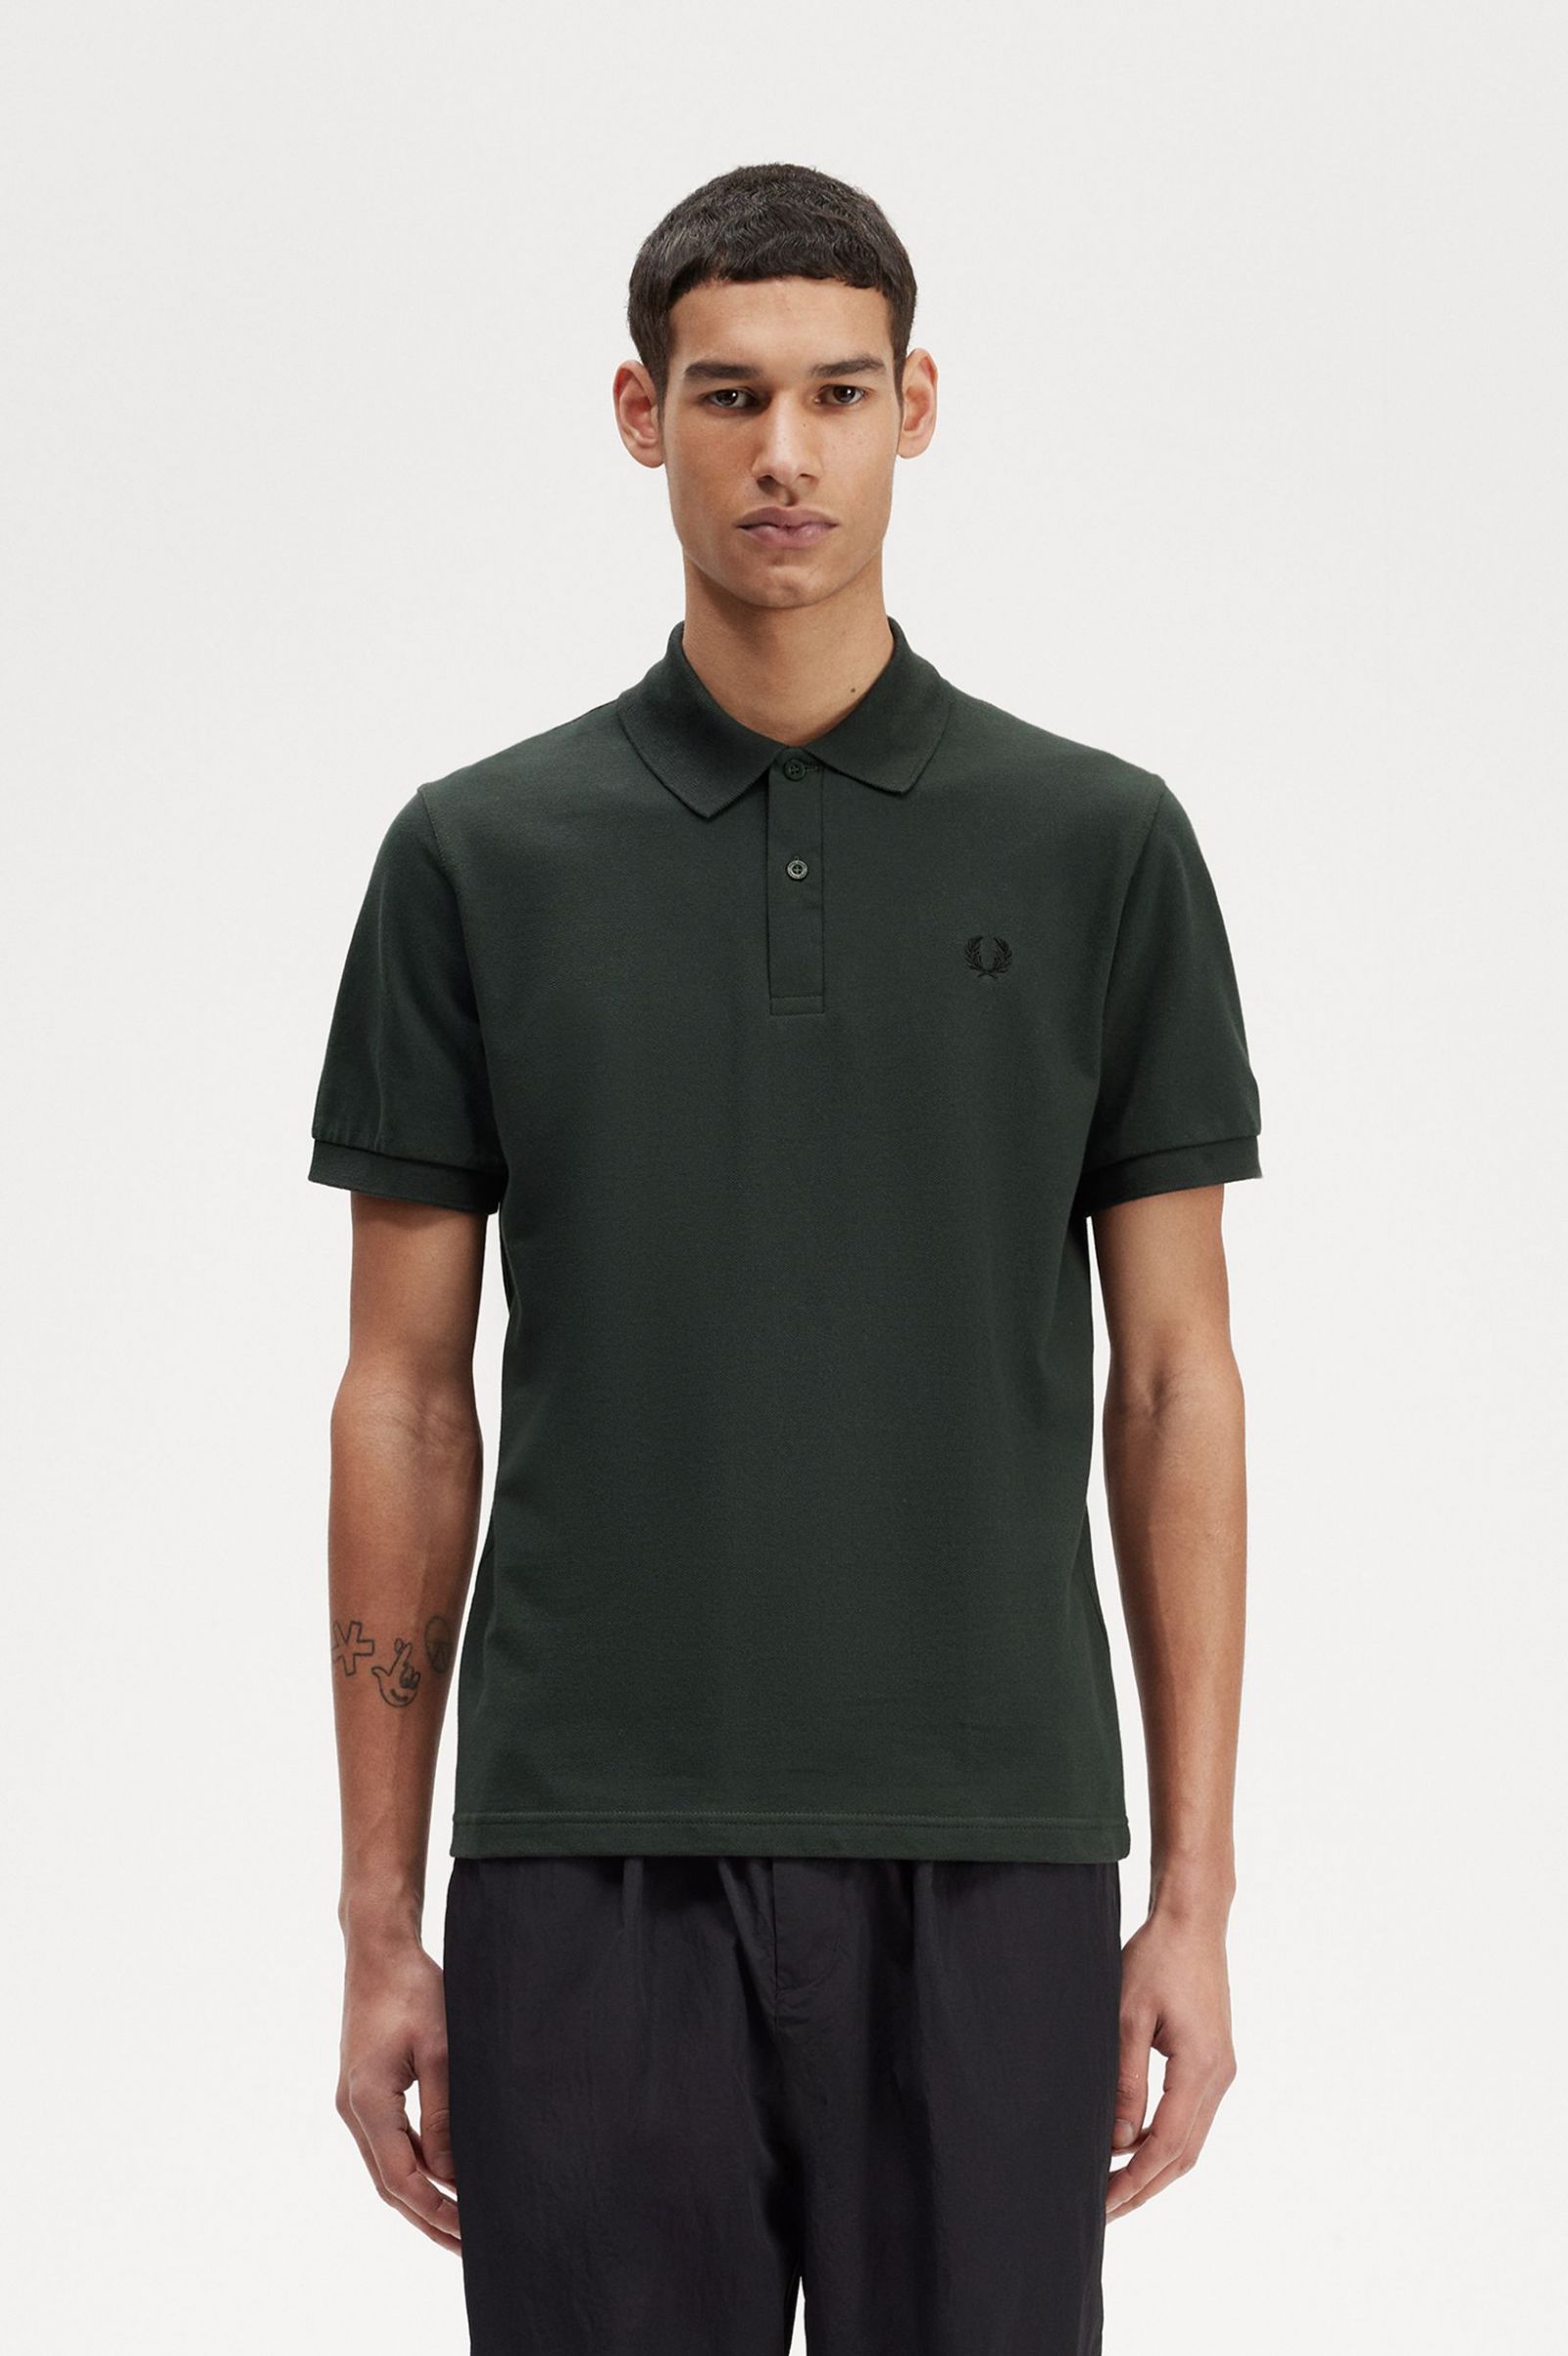 Fred Perry The Original Shirt in Night Green 